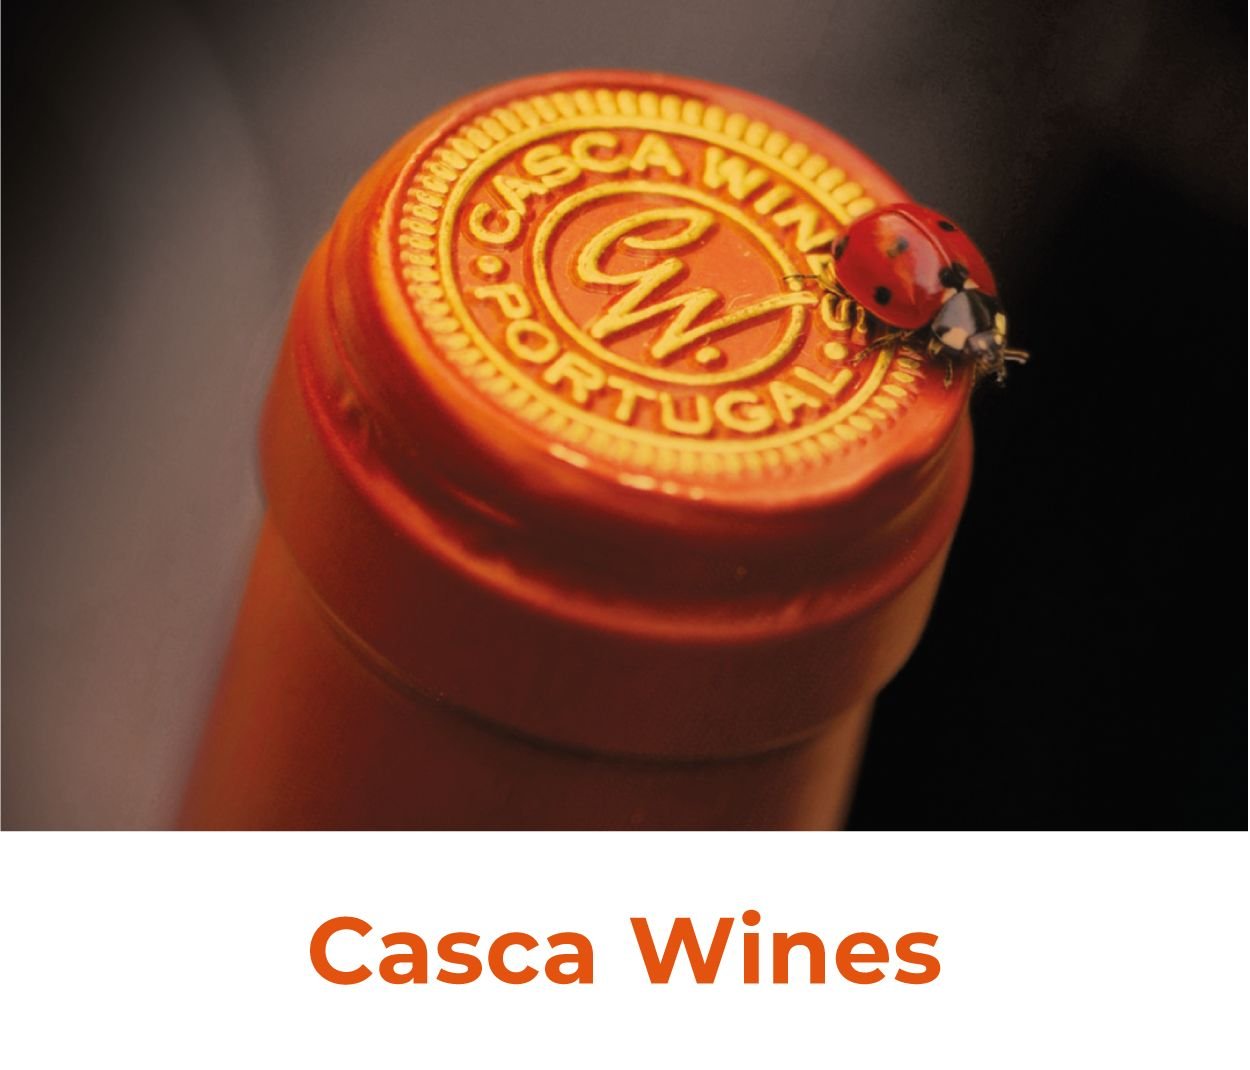 banners-casca-wines-remy-massin-02-compressed